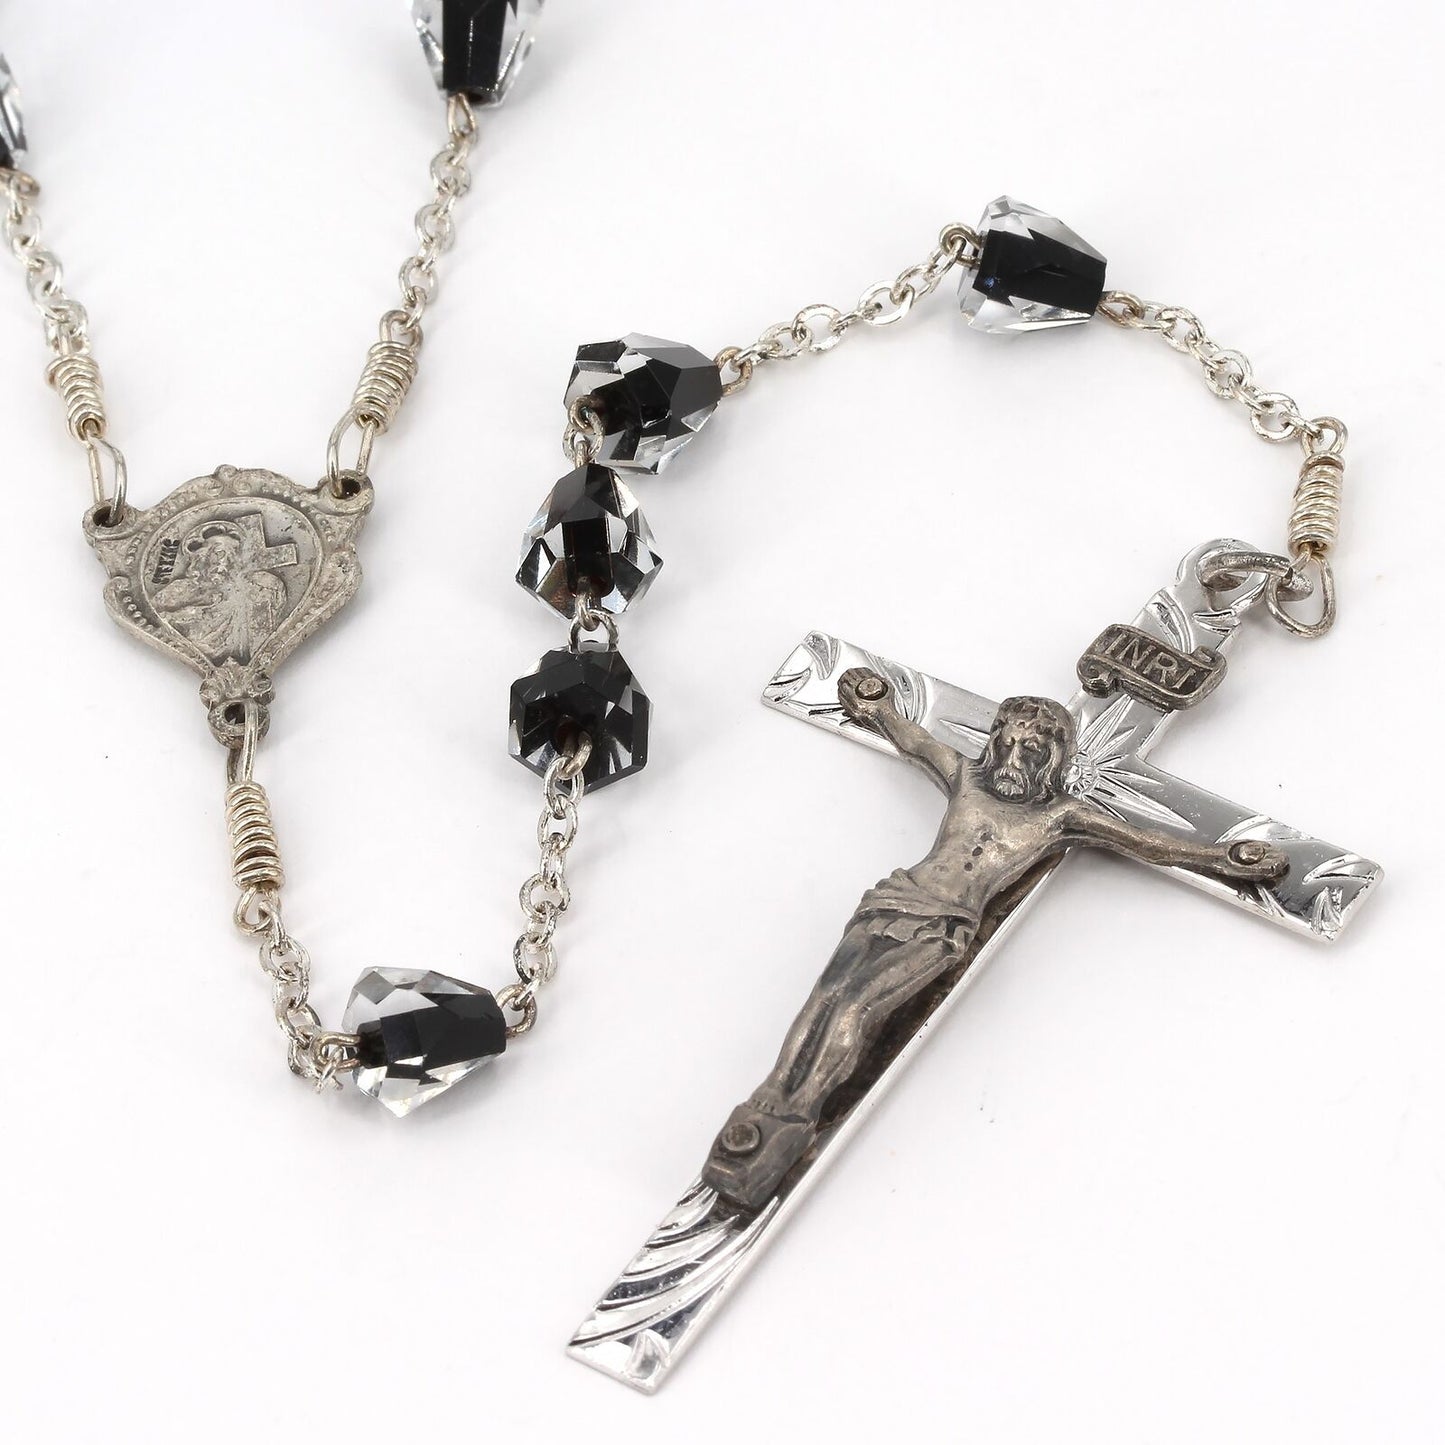 Vintage Sterling Catholic 5-Decade Rosary with Black & Clear Cased Glass Beads